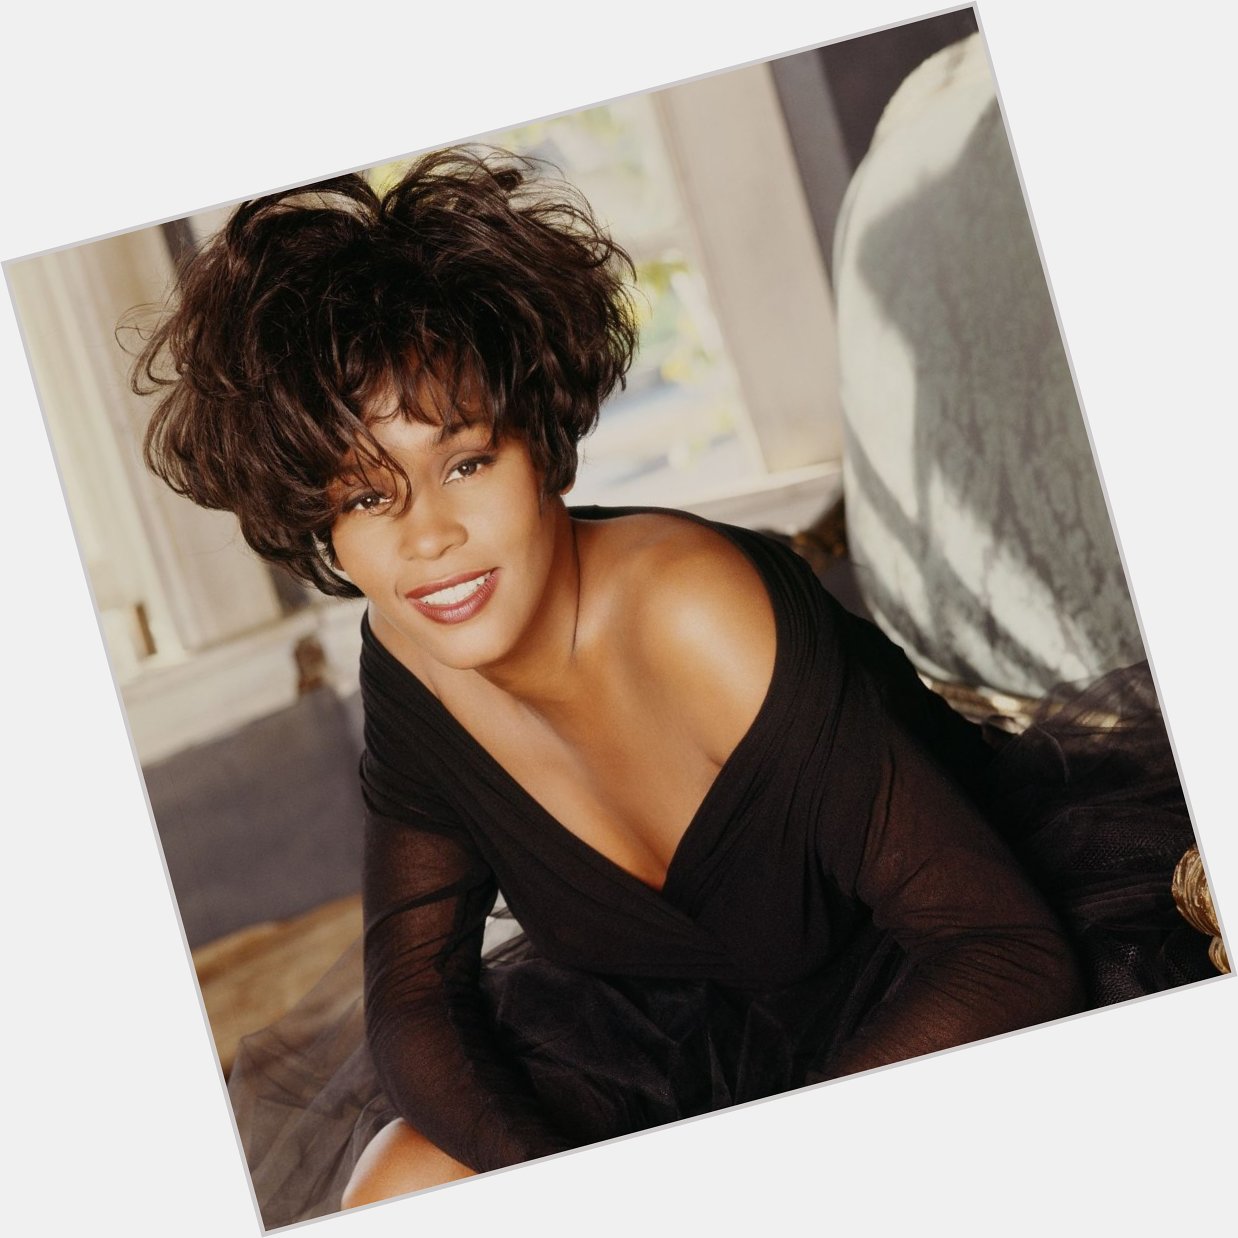 Happy Birthday to The Voice Whitney Houston!   What are the first 7 Whitney Houston songs that come to mind? 